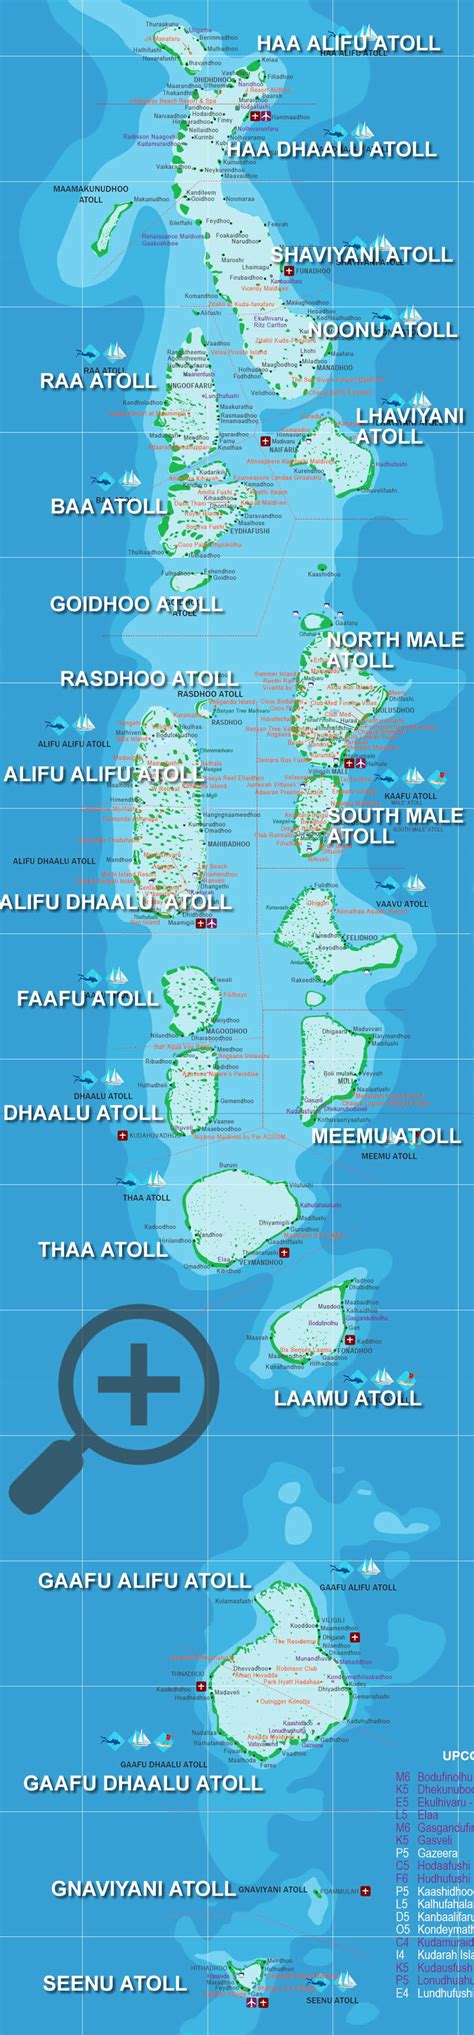 Maldives Maps Maldives Map With Resorts Hotels Guesthouses anв Airports